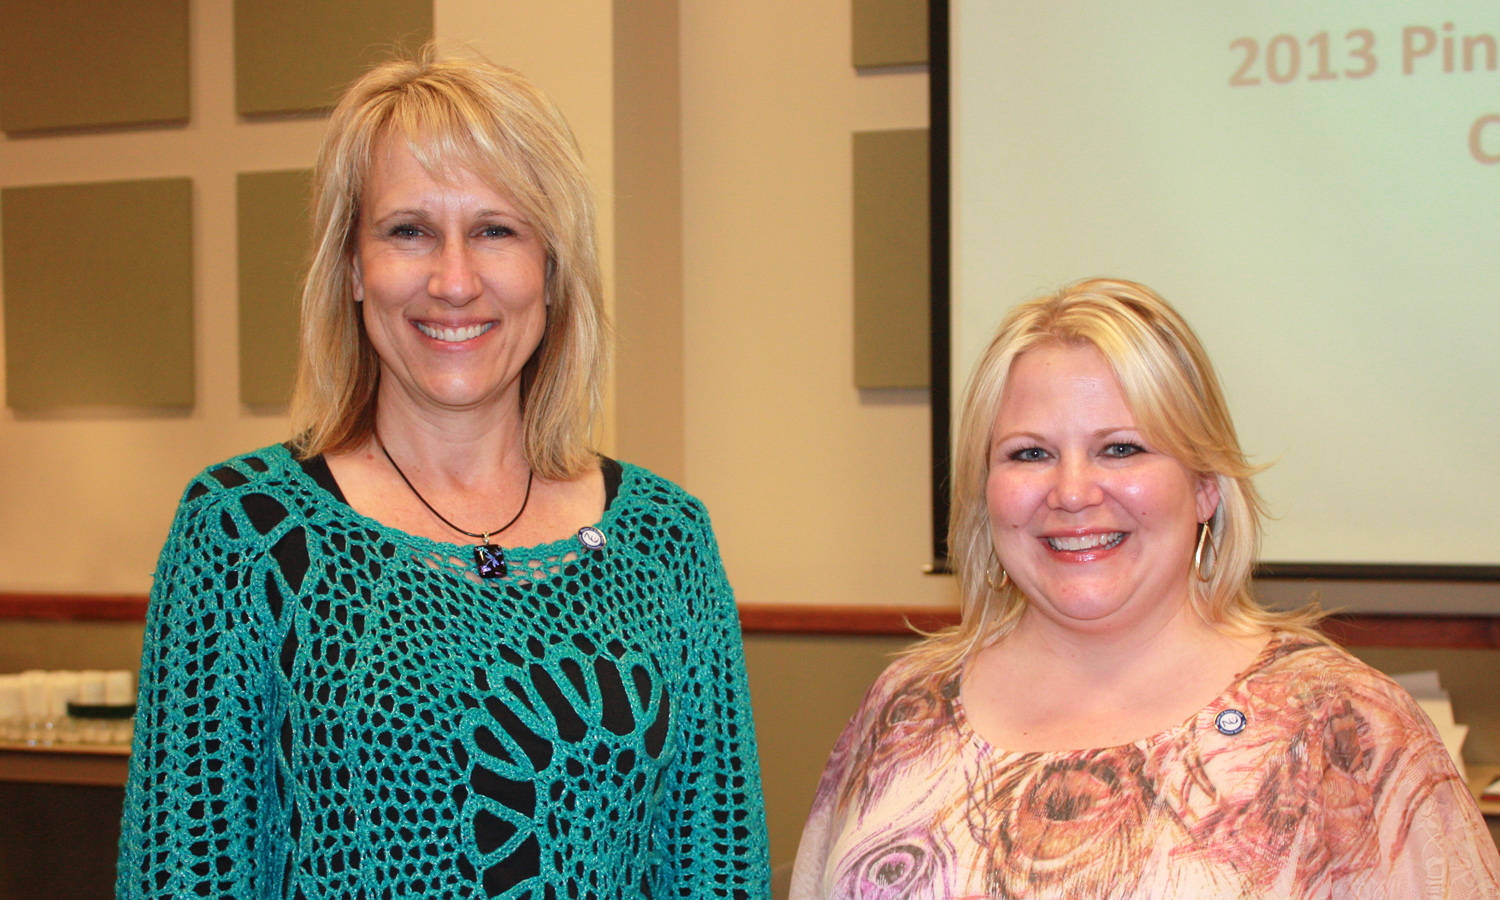 MSW graduates from Hutchinson who received pins were Sheri A. Krahn, left, and Libertee D. Thompson.